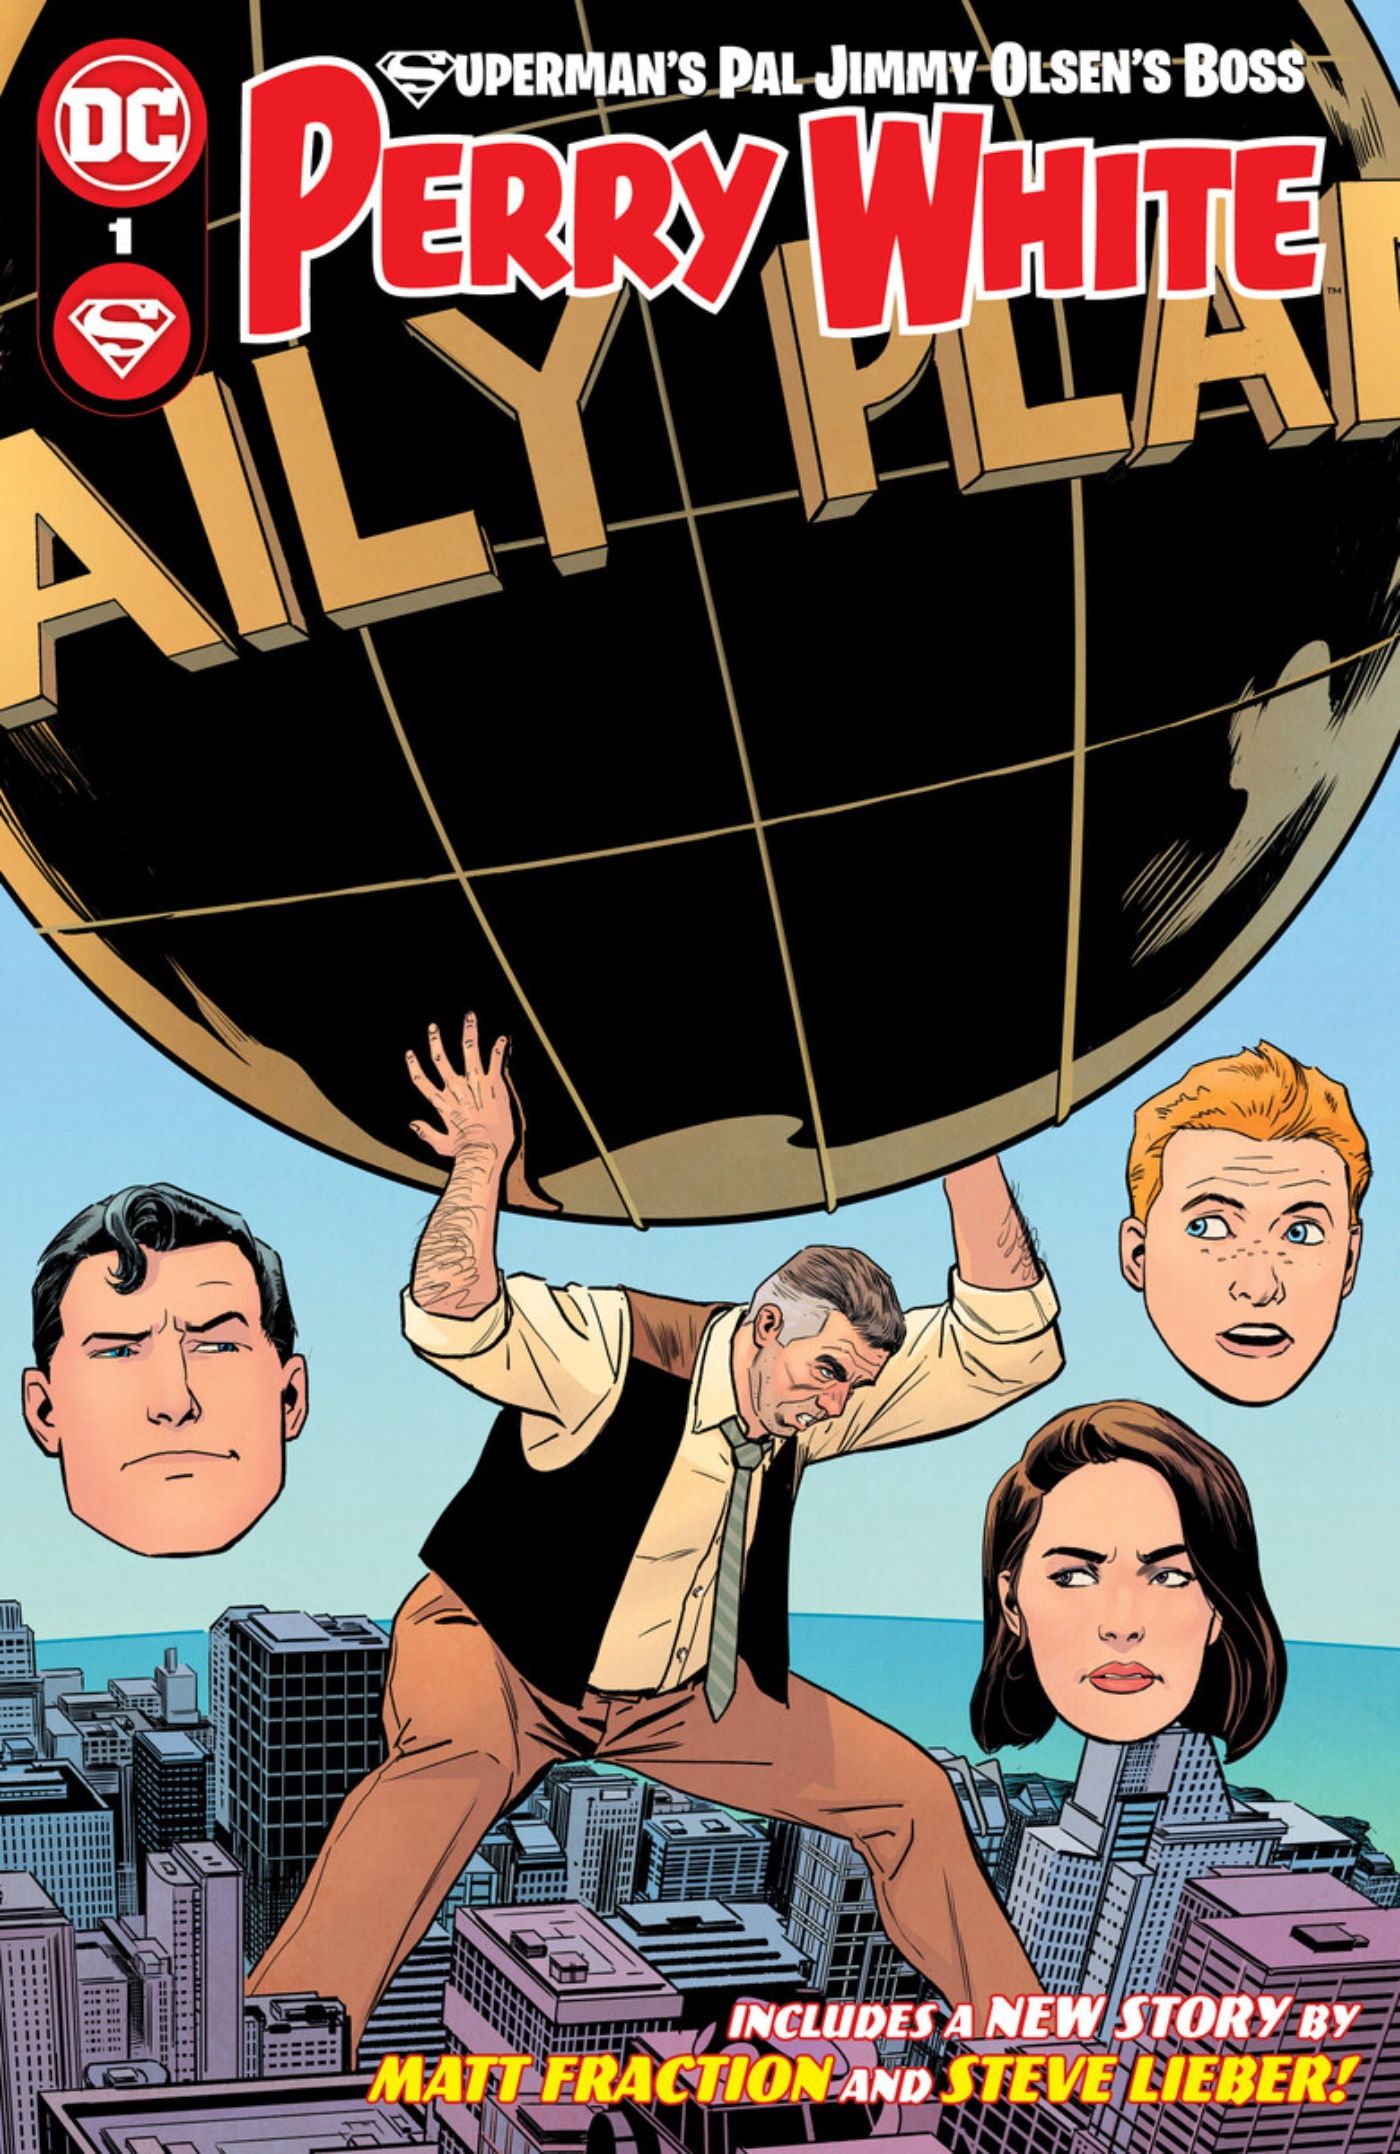 Perry White holding up the Daily Planet globe while Superman, Jimmy and Lois look on